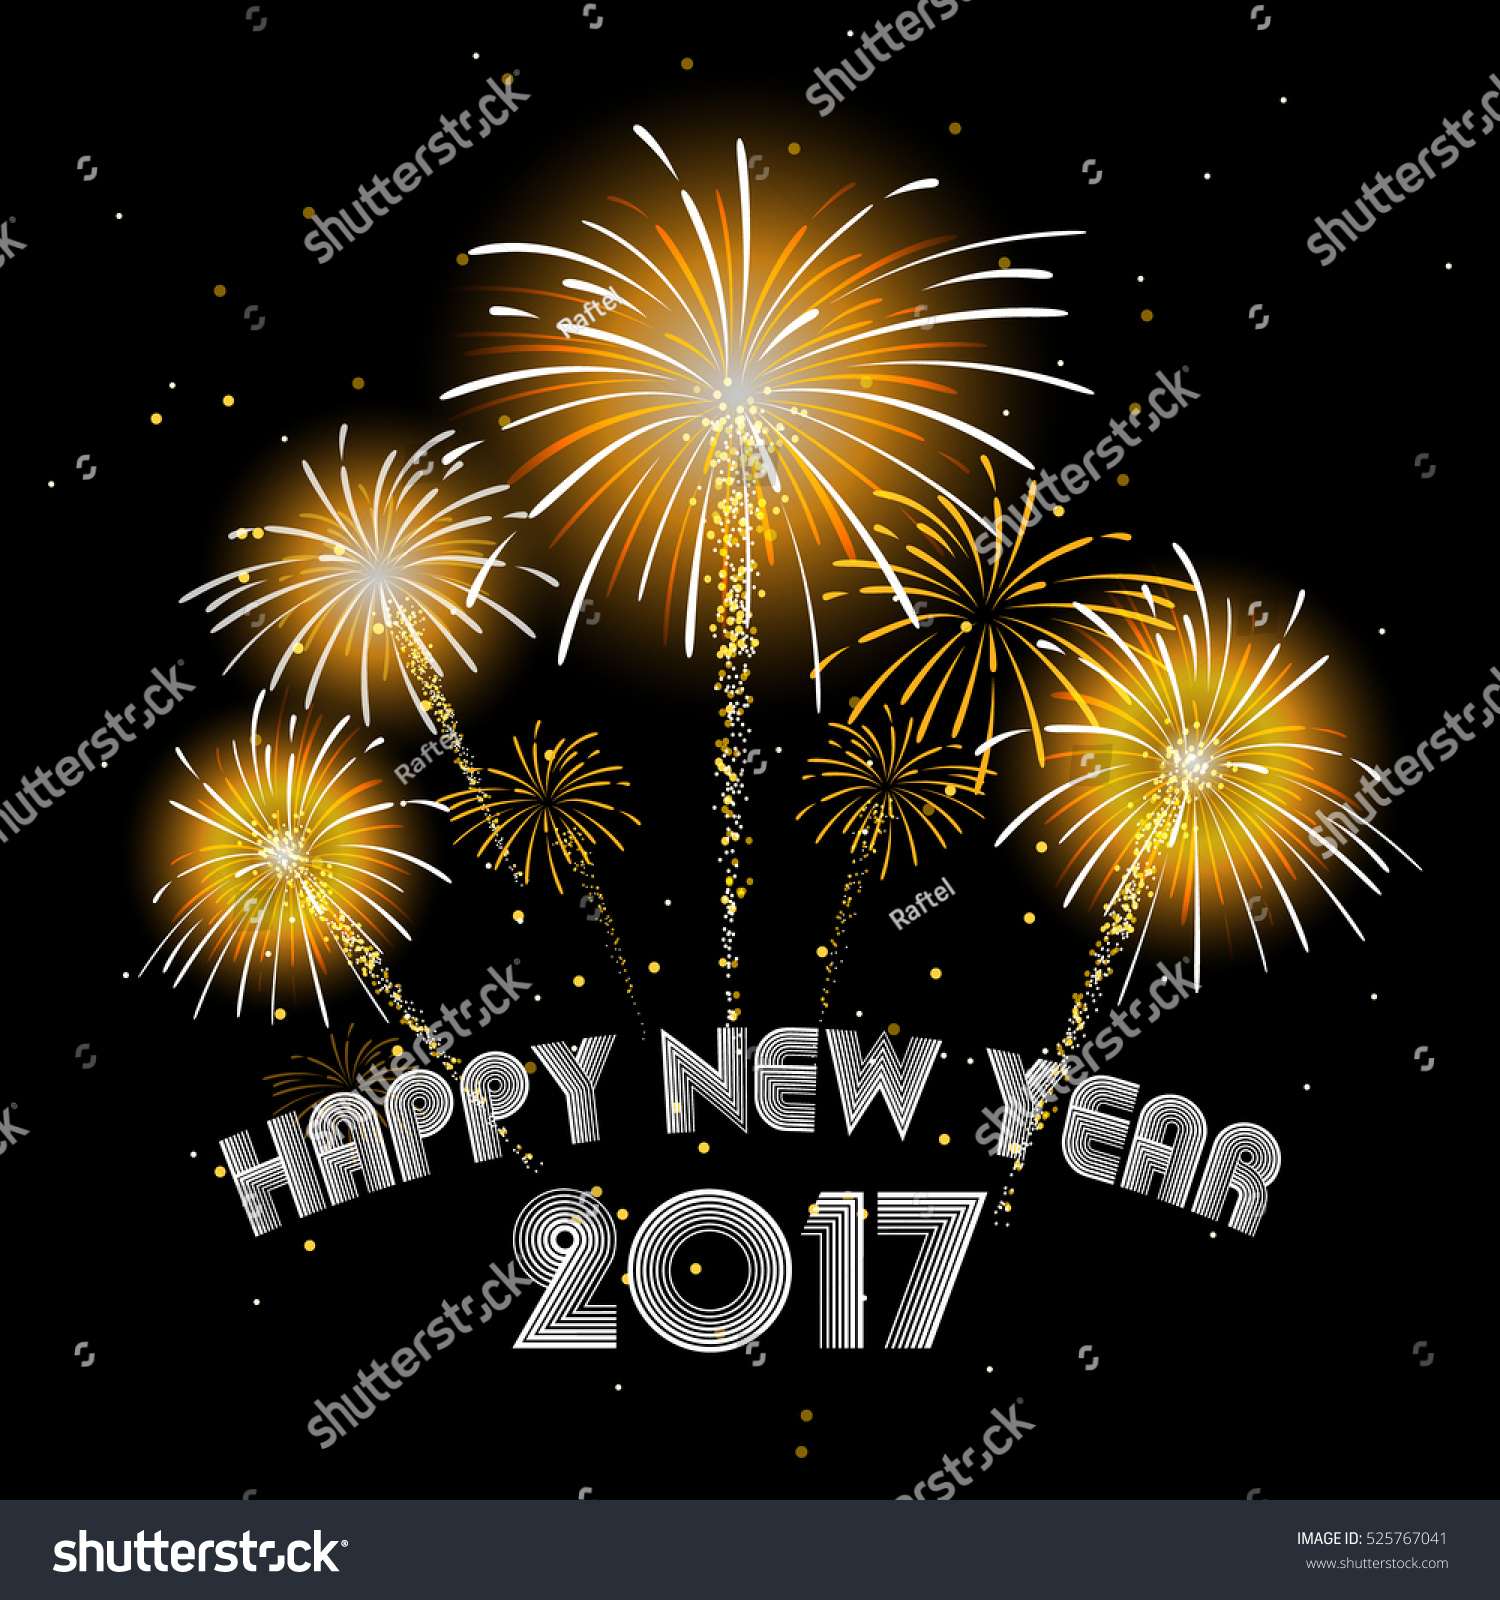 2017 Happy New Year Fireworks Night Stock Vector 525767041